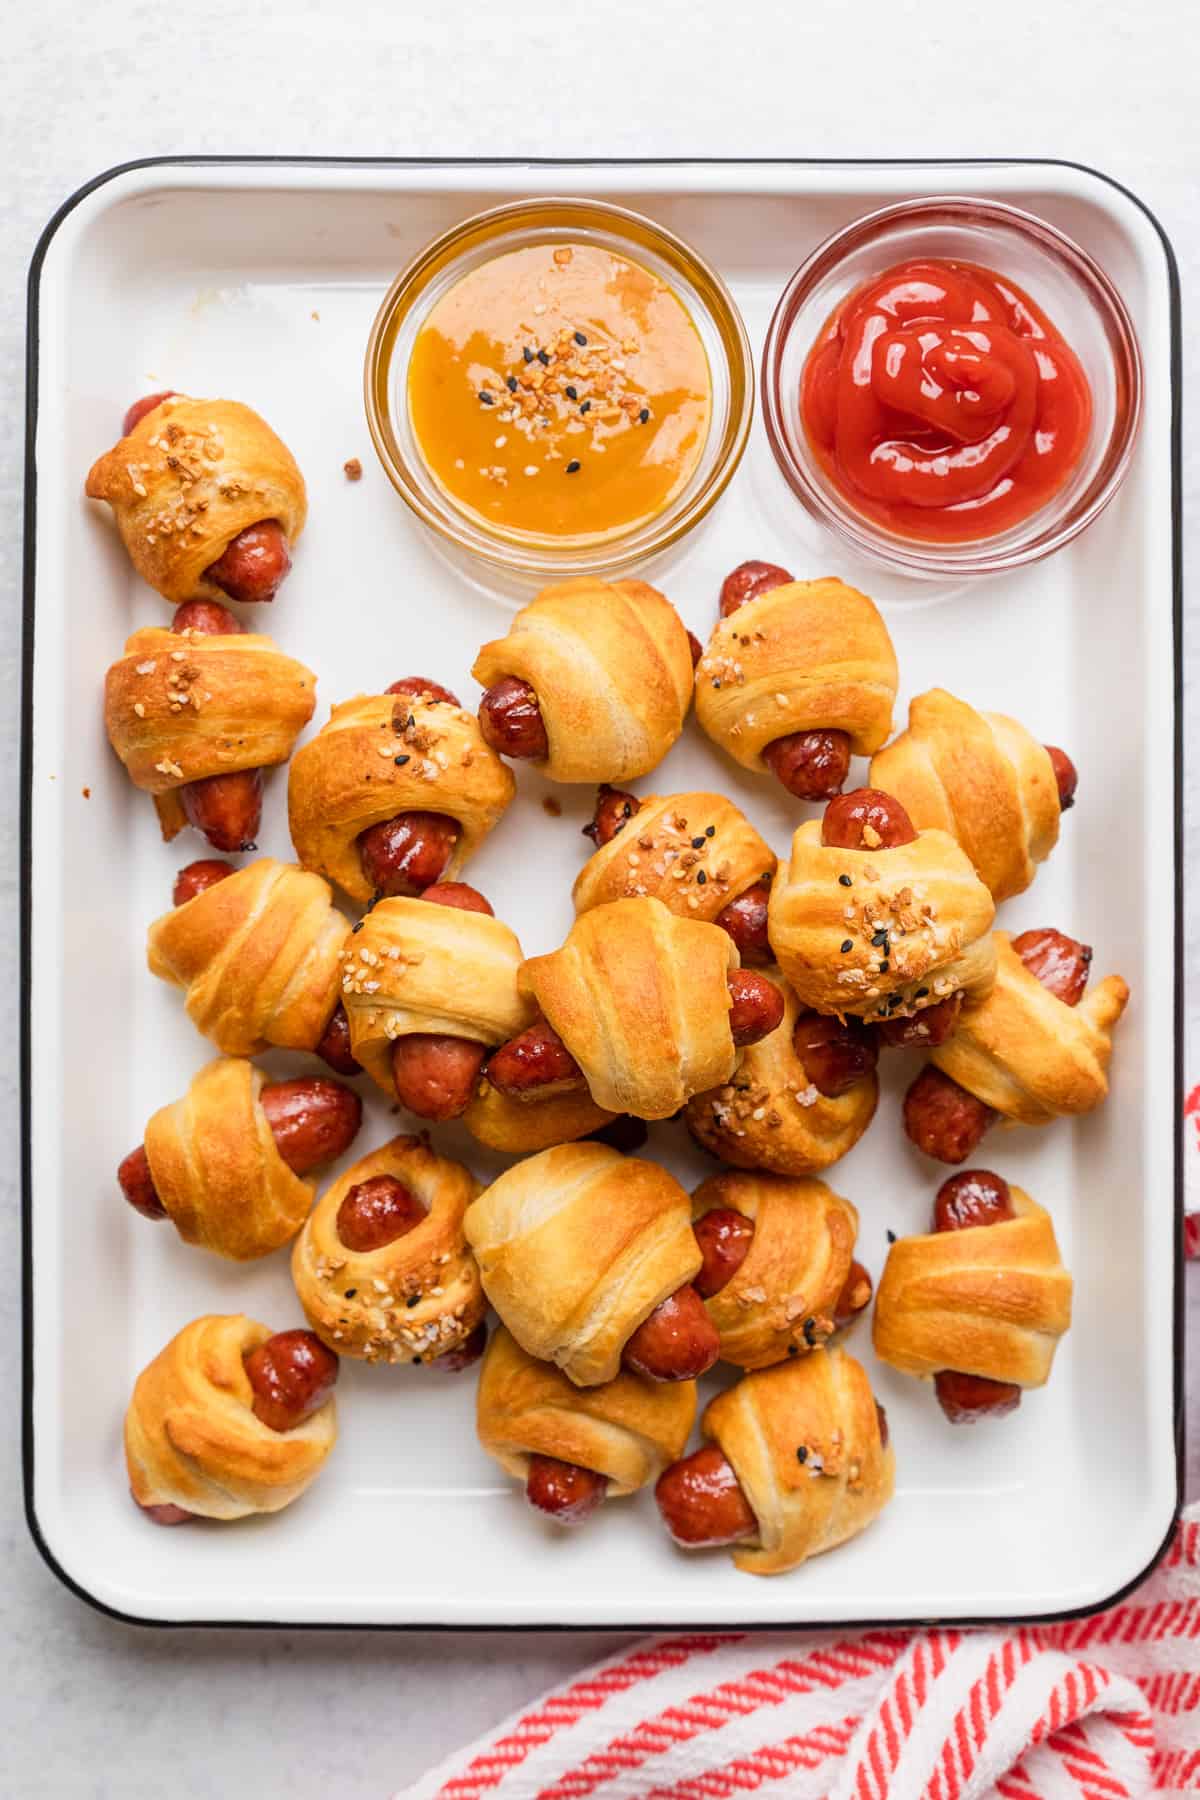 The completed pig in a blanket recipe on a white platter.